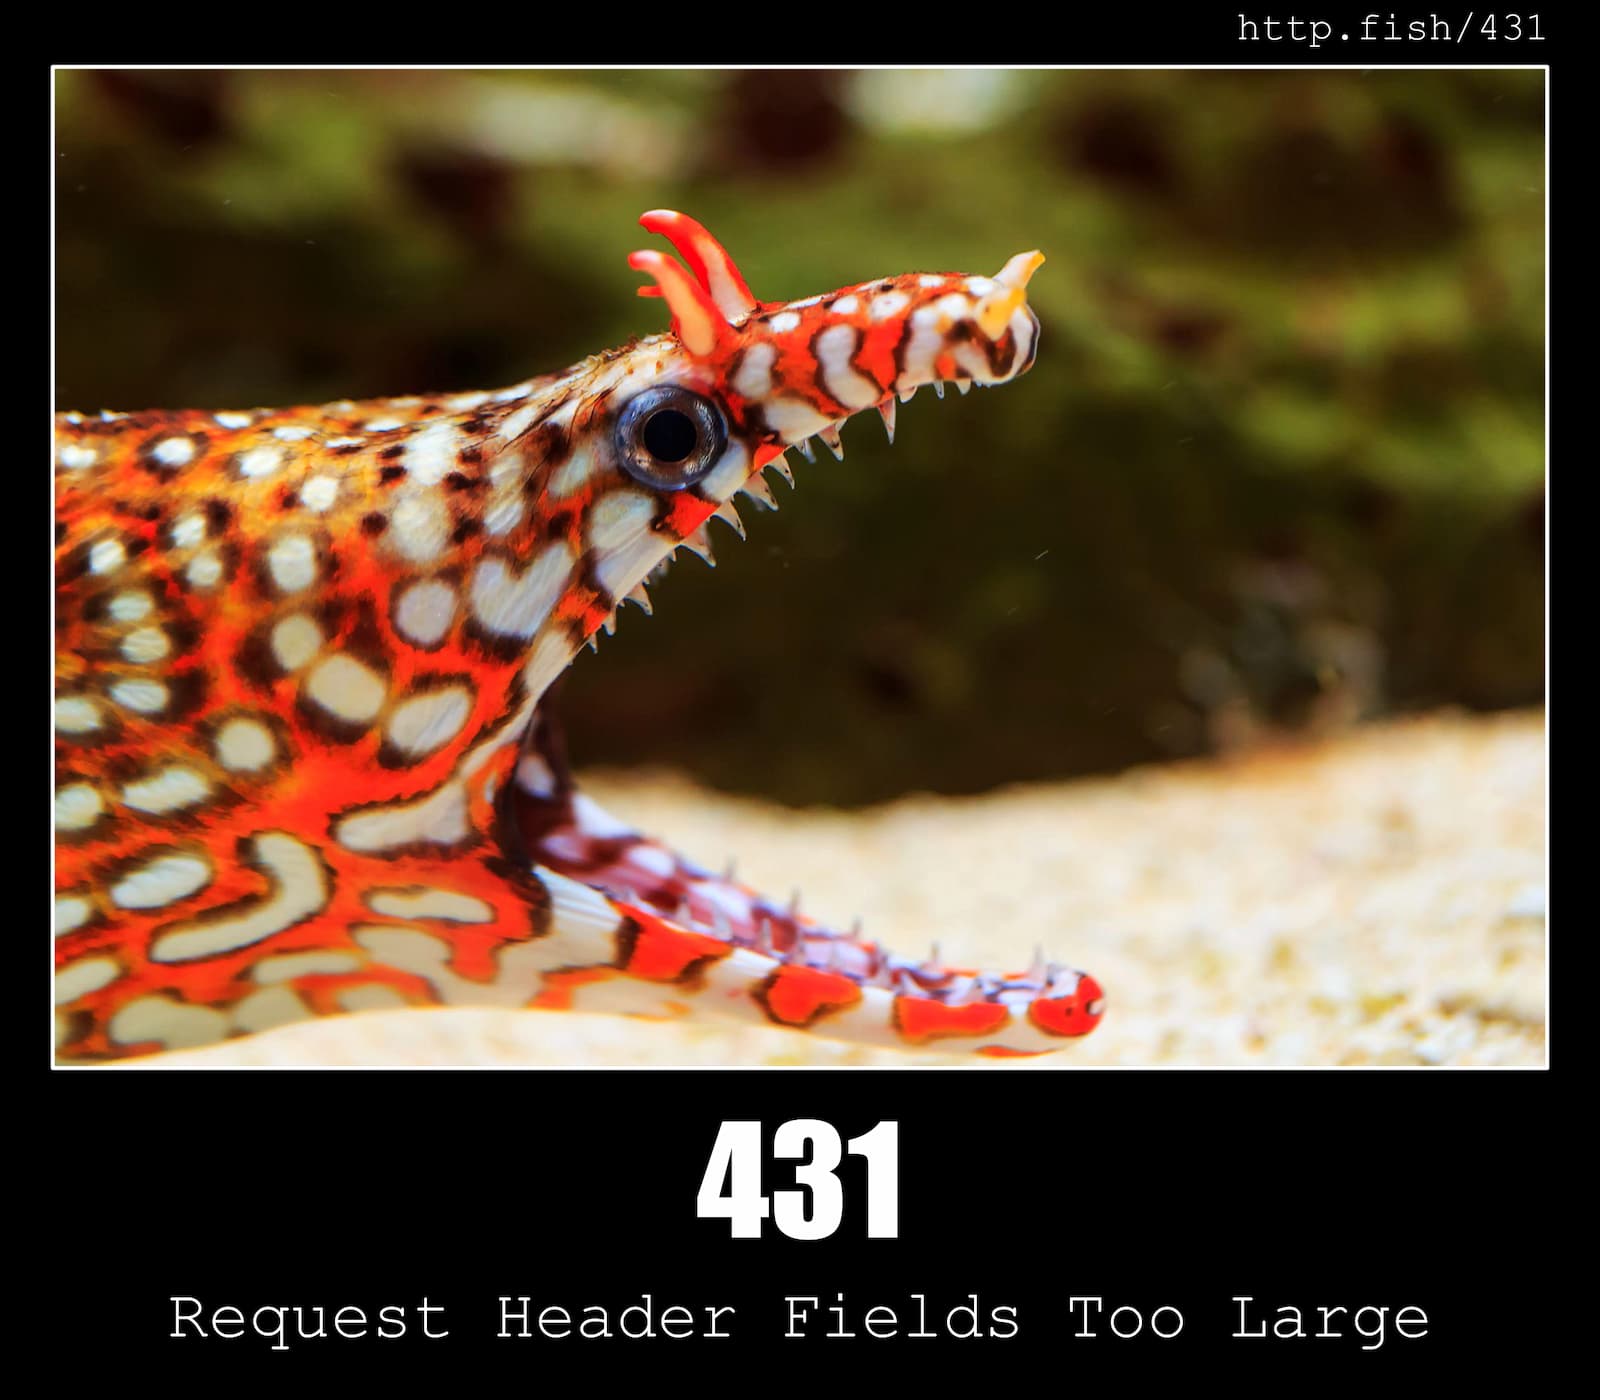 HTTP Status Code 431 Request Header Fields Too Large & Fish